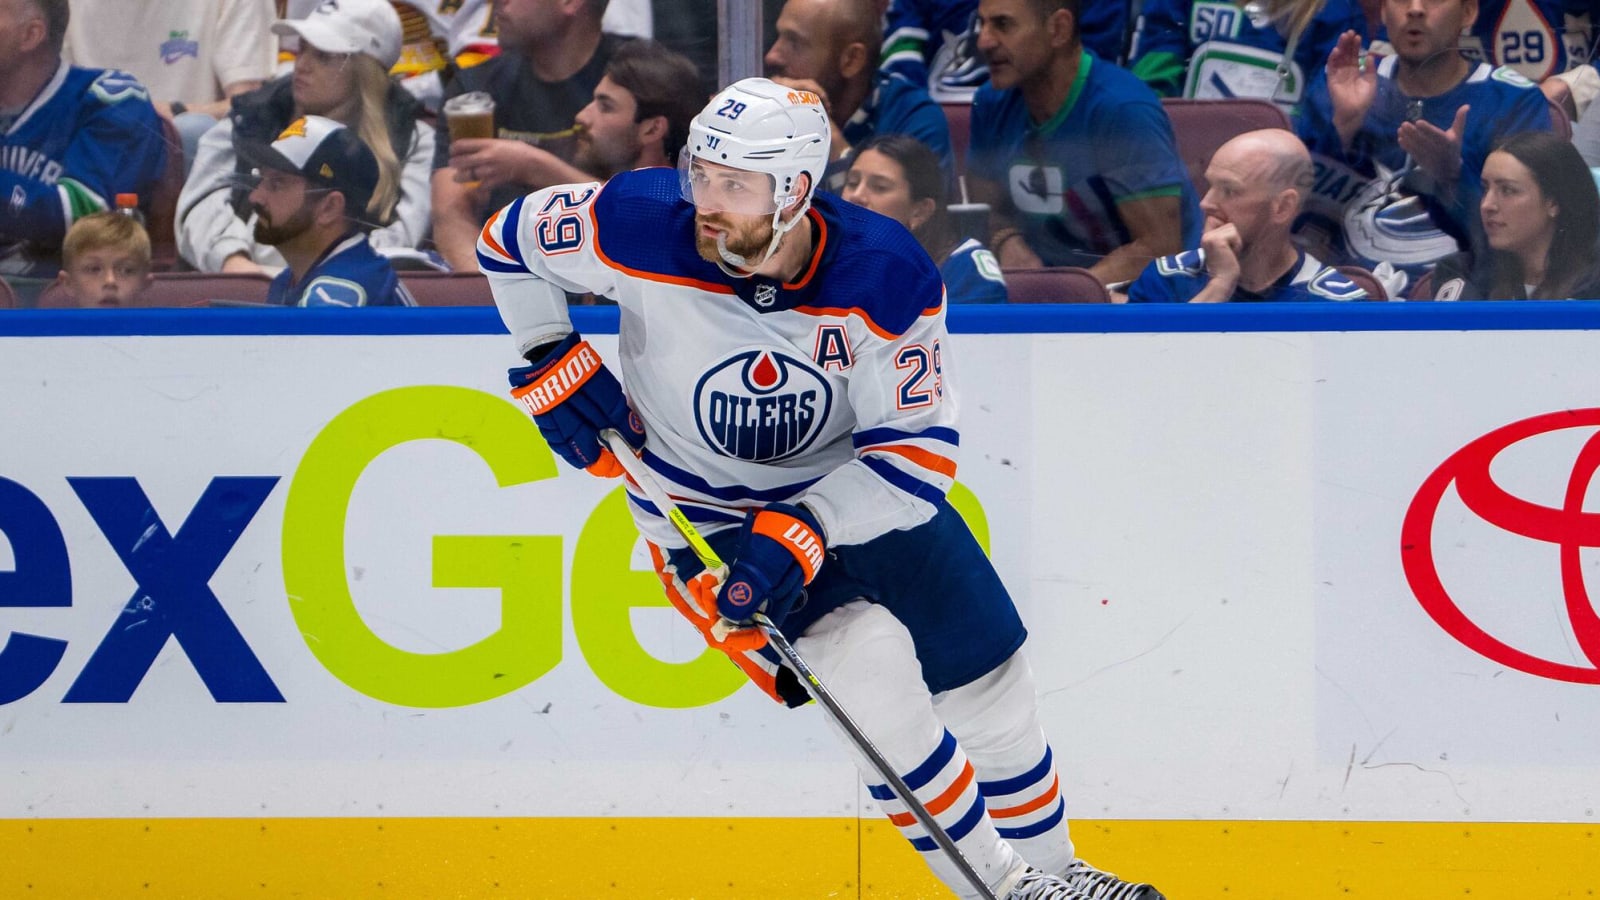 Odd Rumor Links Leon Draisaitl to Sharks If Oilers Fall Out of Playoffs